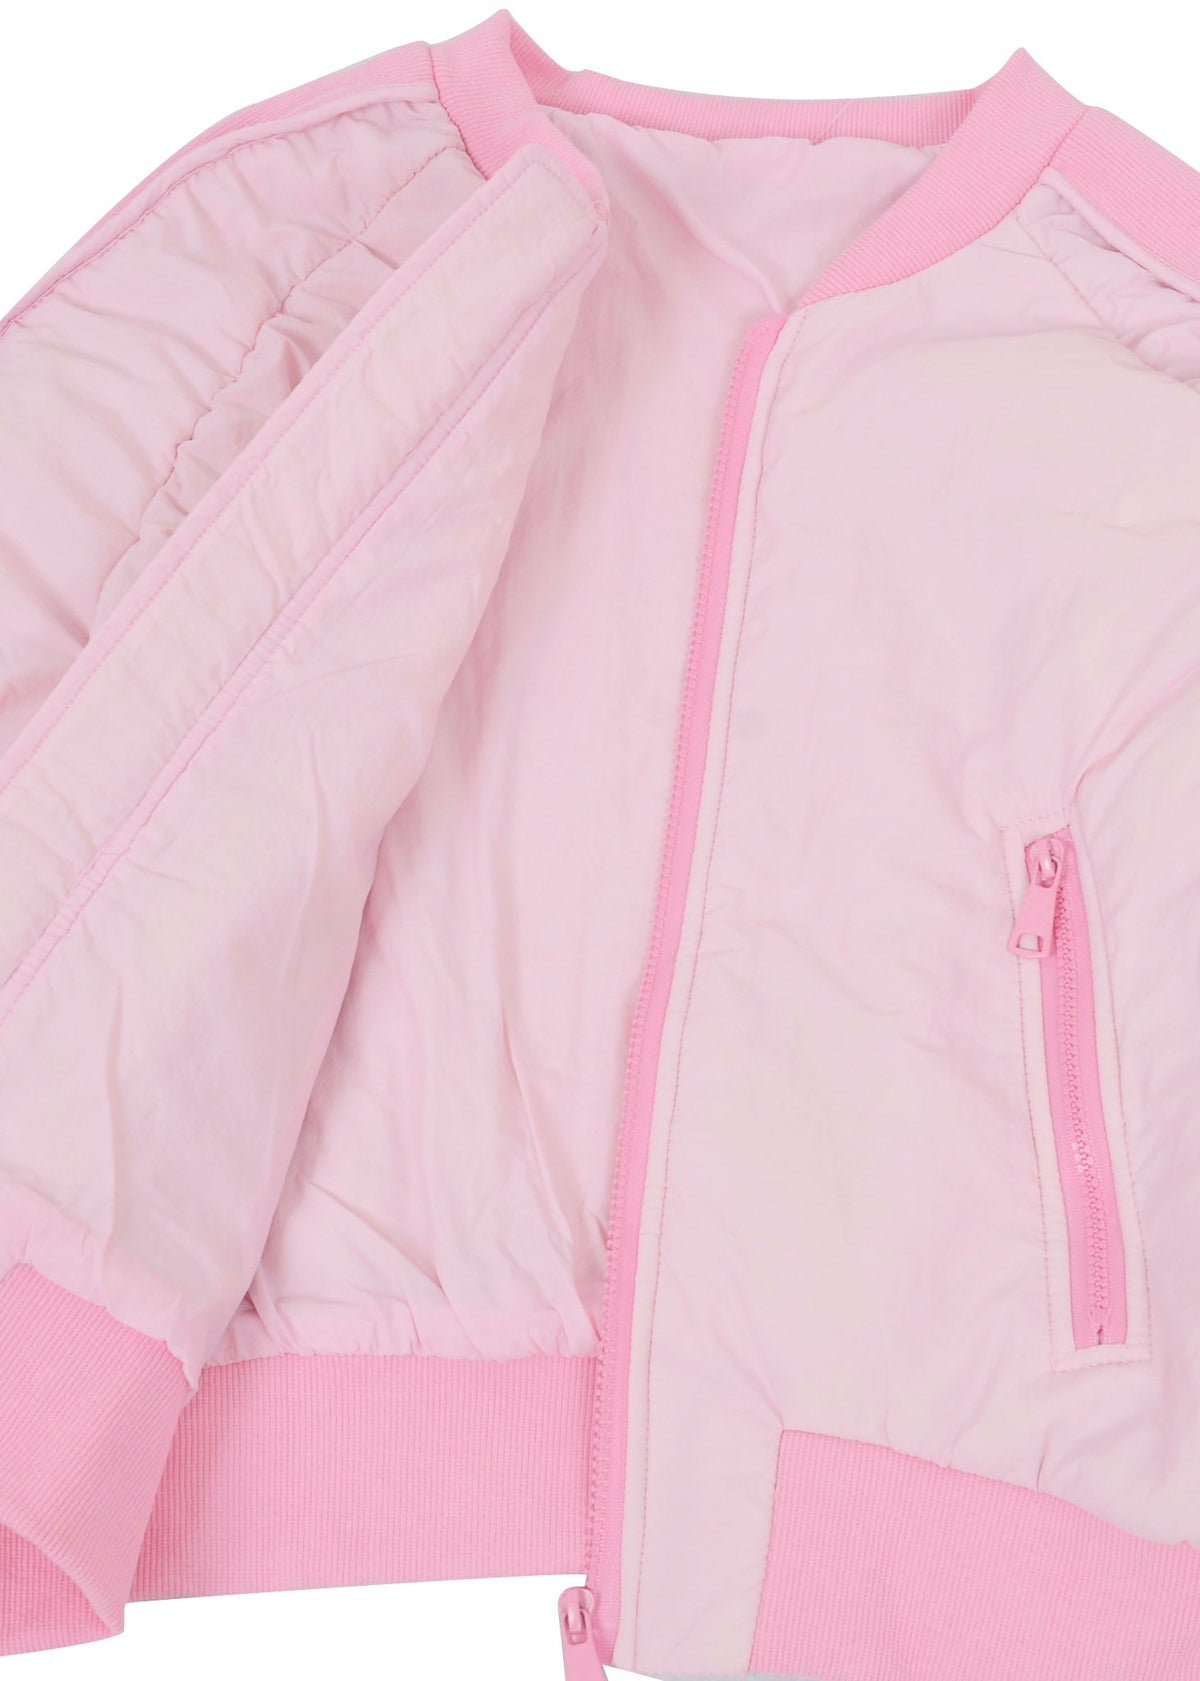 Two Tone Zip-Up Puffer Jacket for baseball